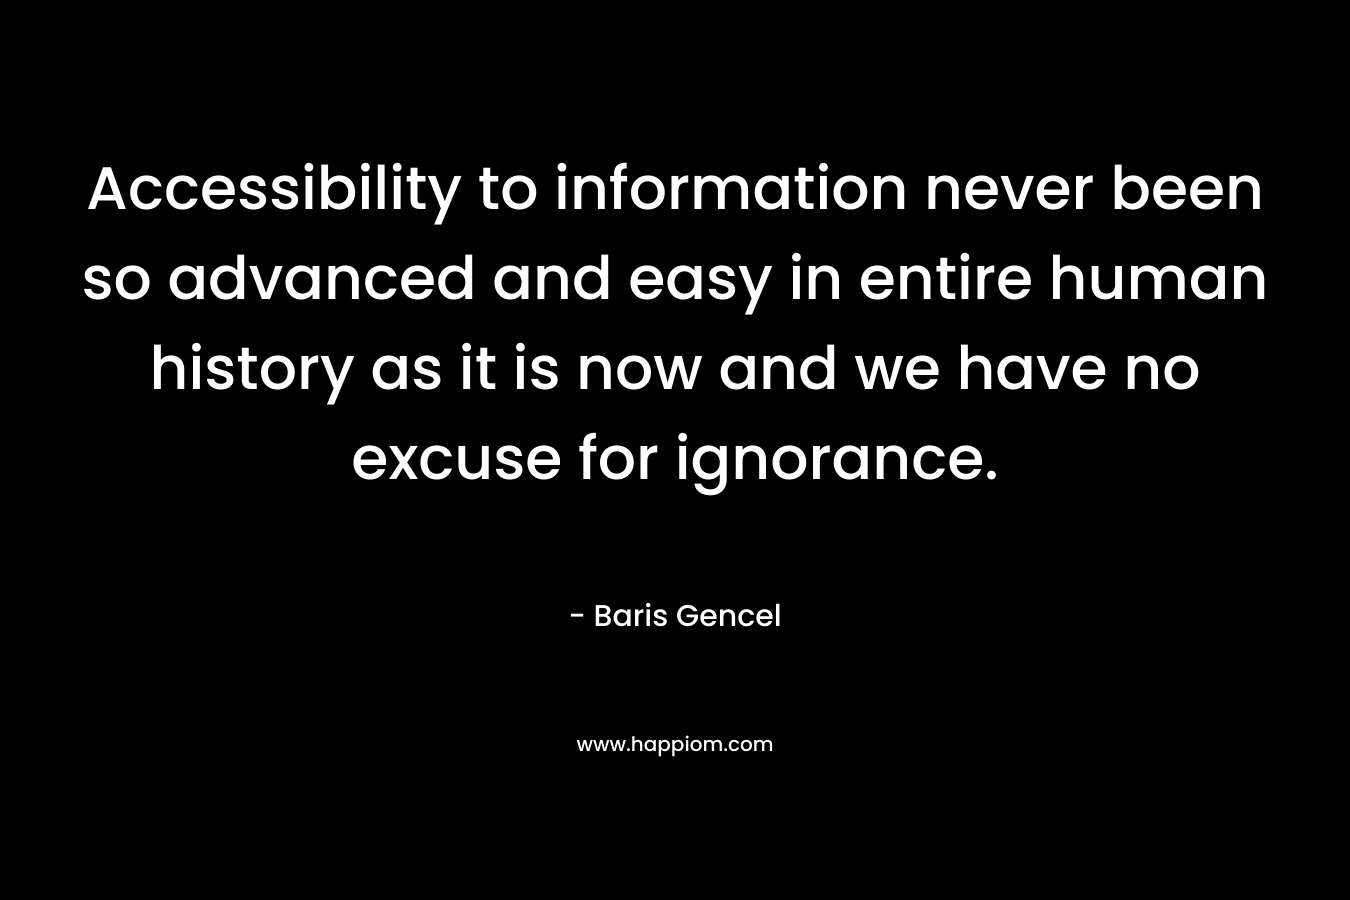 Accessibility to information never been so advanced and easy in entire human history as it is now and we have no excuse for ignorance. – Baris Gencel